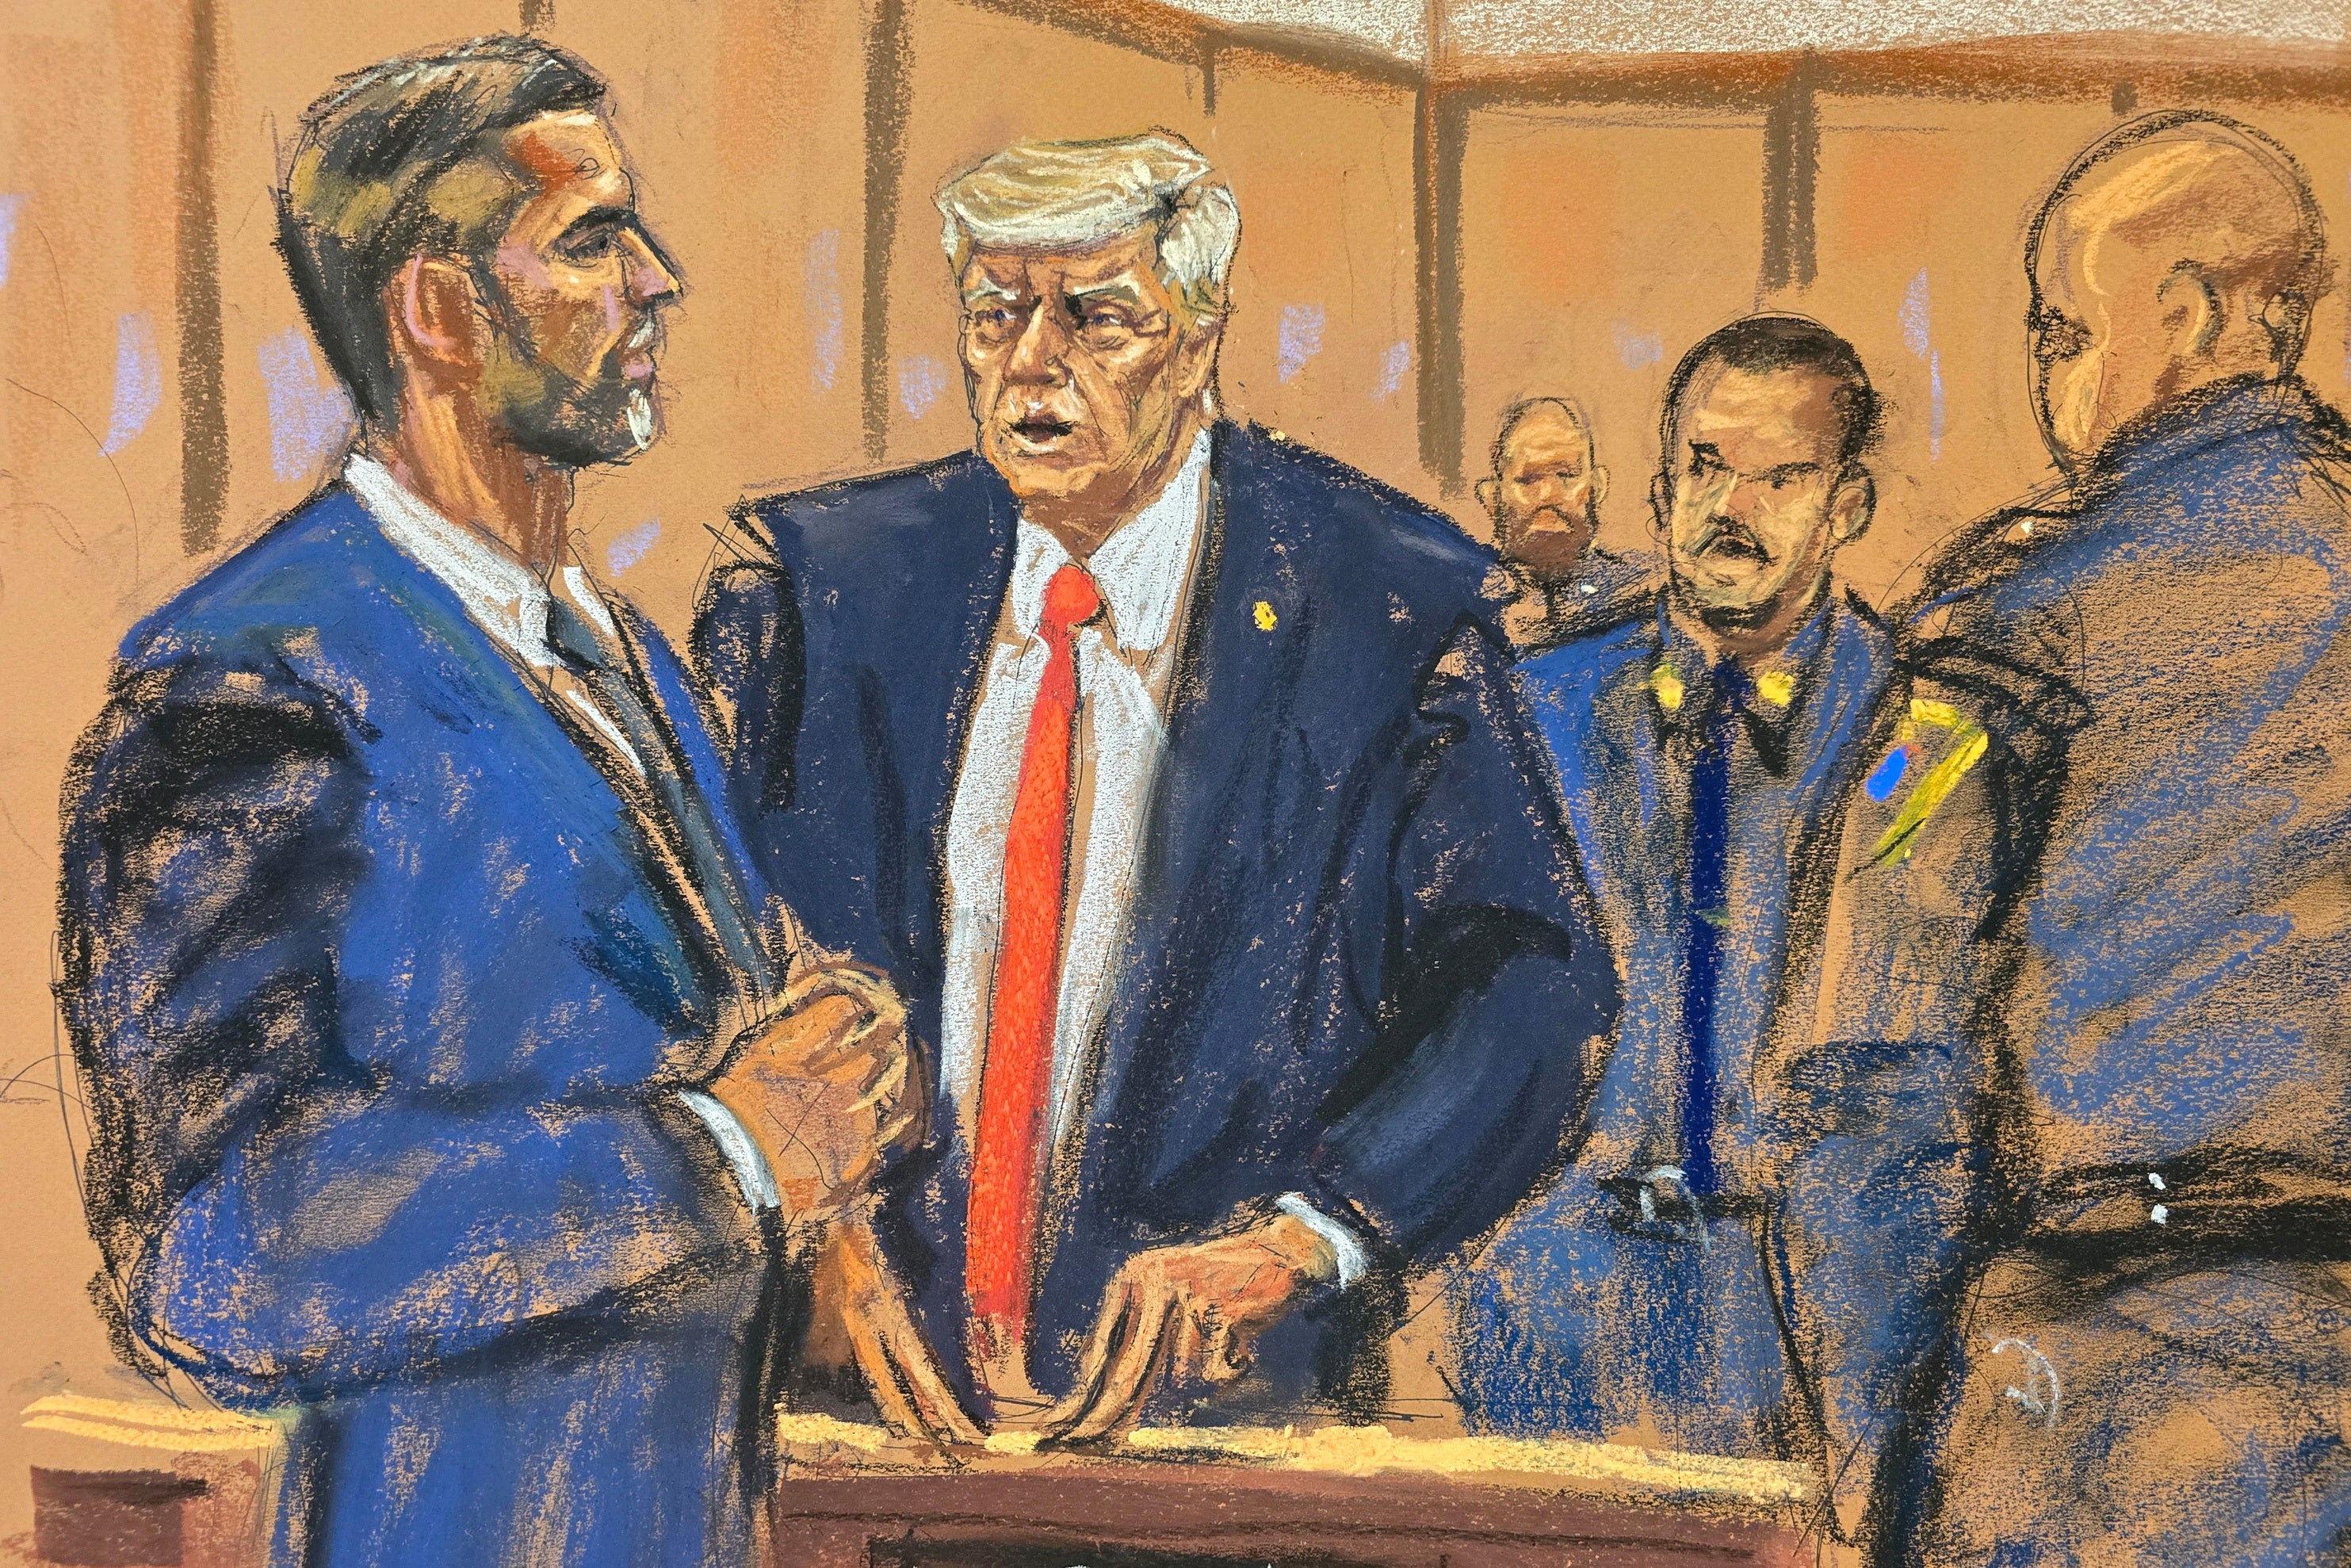 insiders thought access hollywood tape would be beginning of the end for trump, trial hears